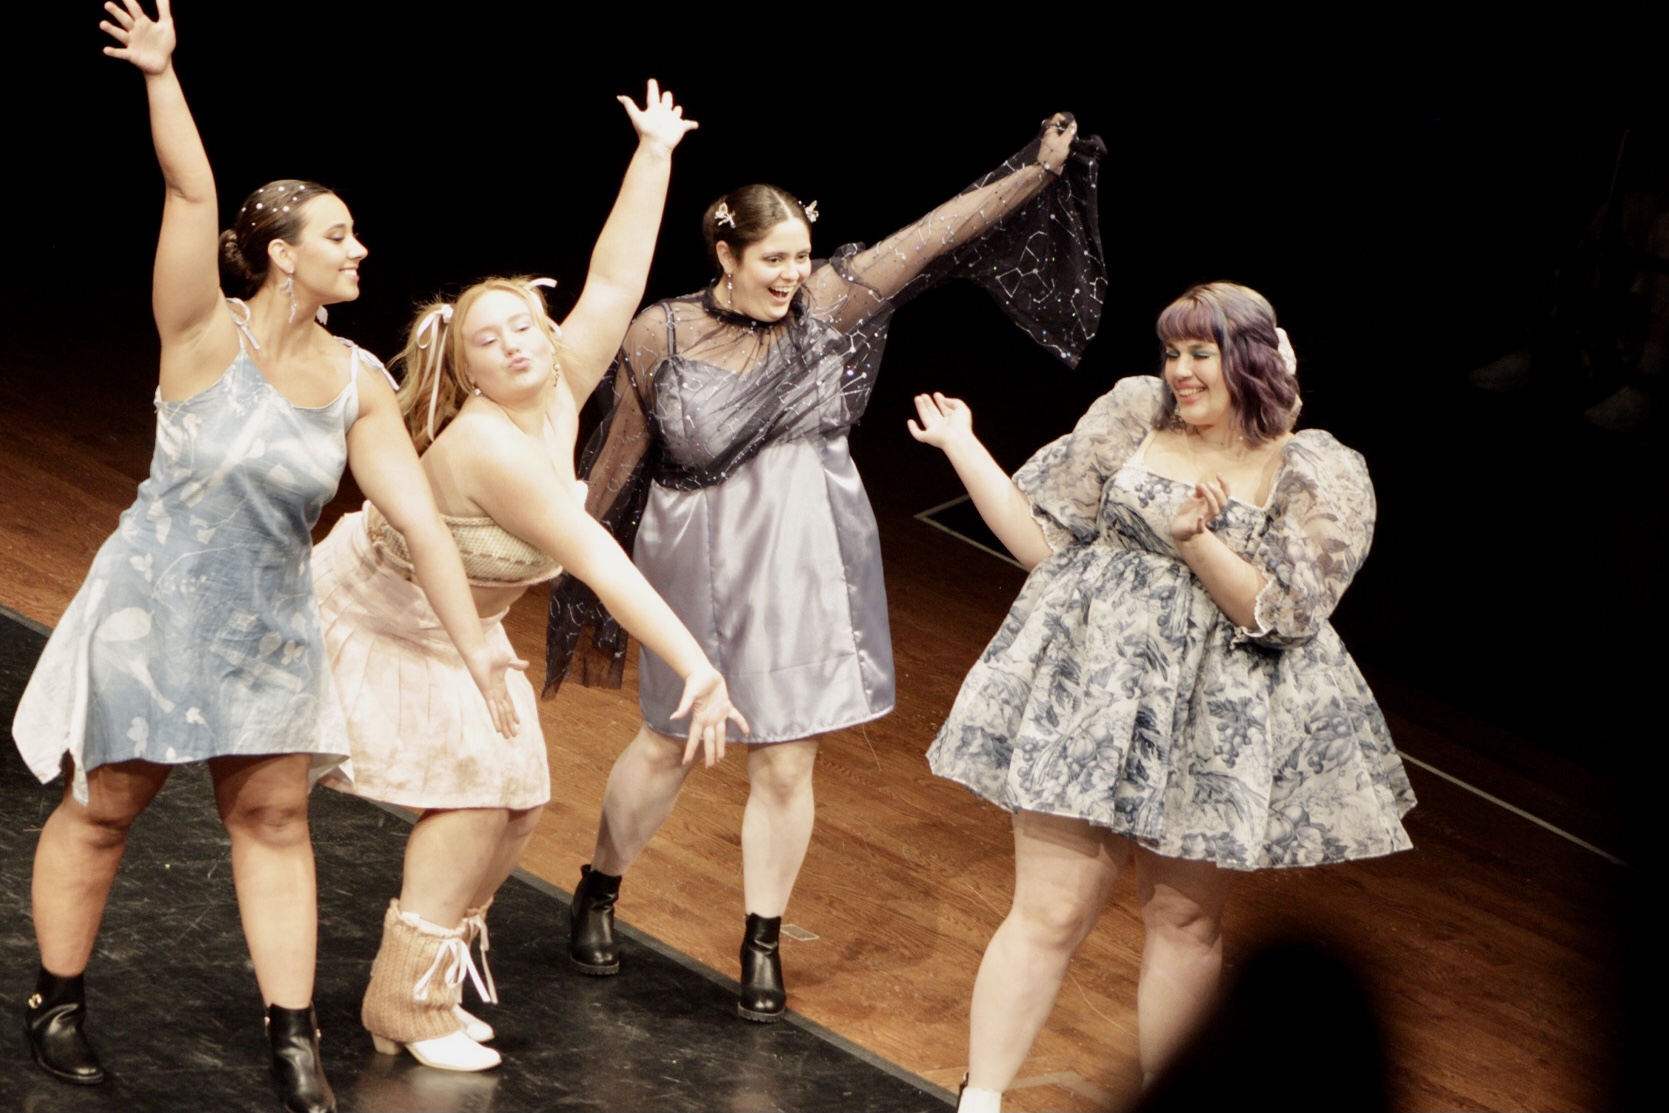 On a stage, four people in dresses with arms out in excitement.